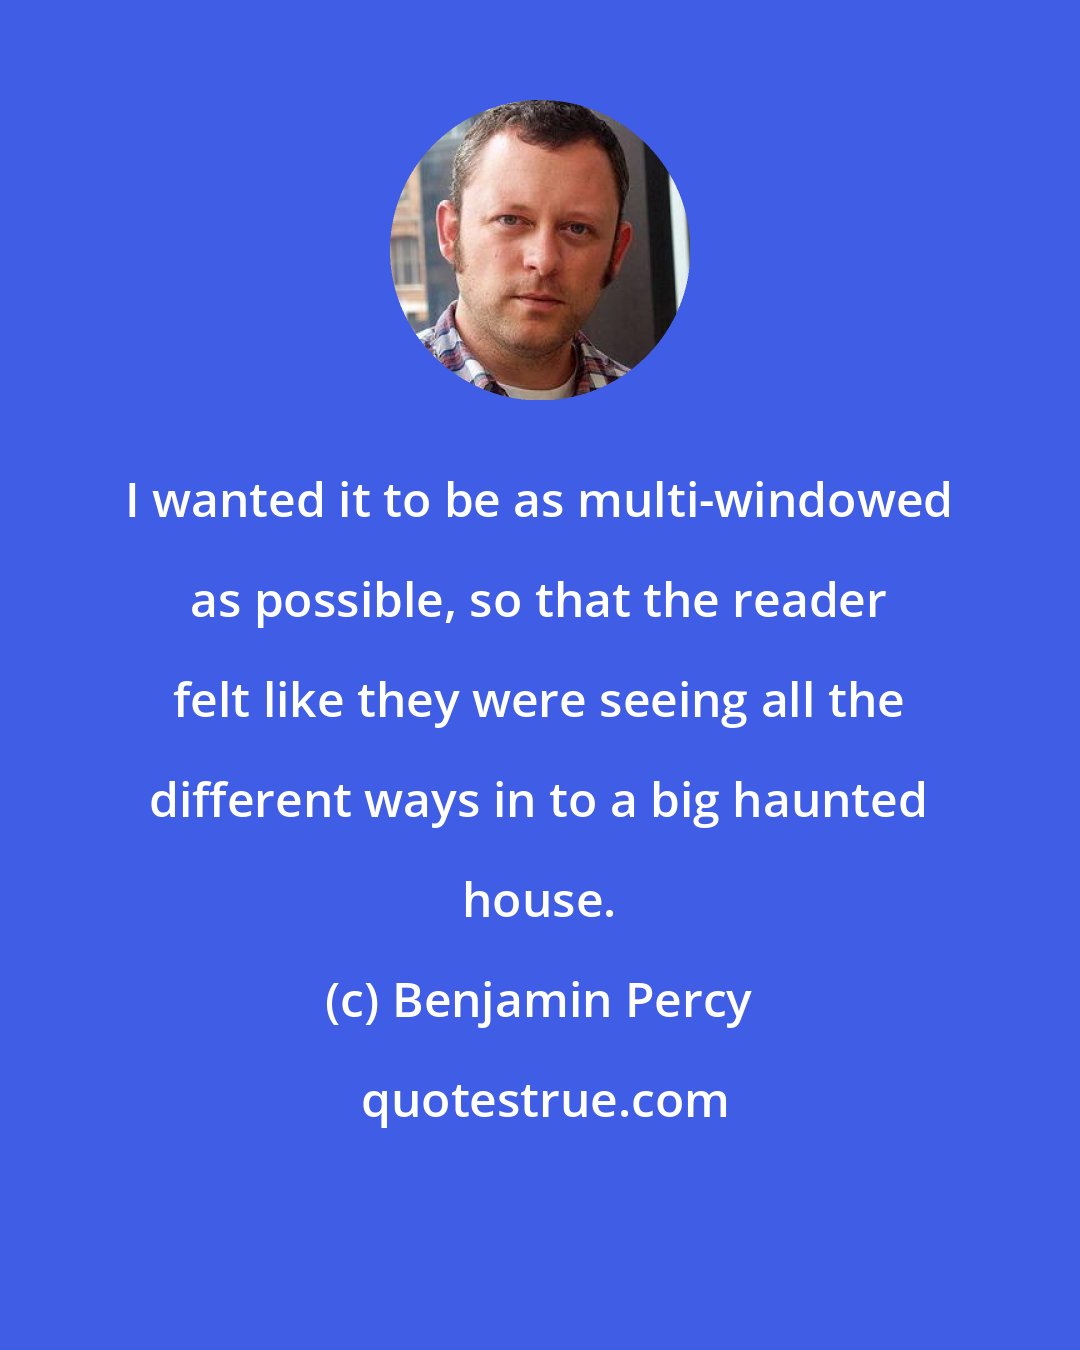 Benjamin Percy: I wanted it to be as multi-windowed as possible, so that the reader felt like they were seeing all the different ways in to a big haunted house.